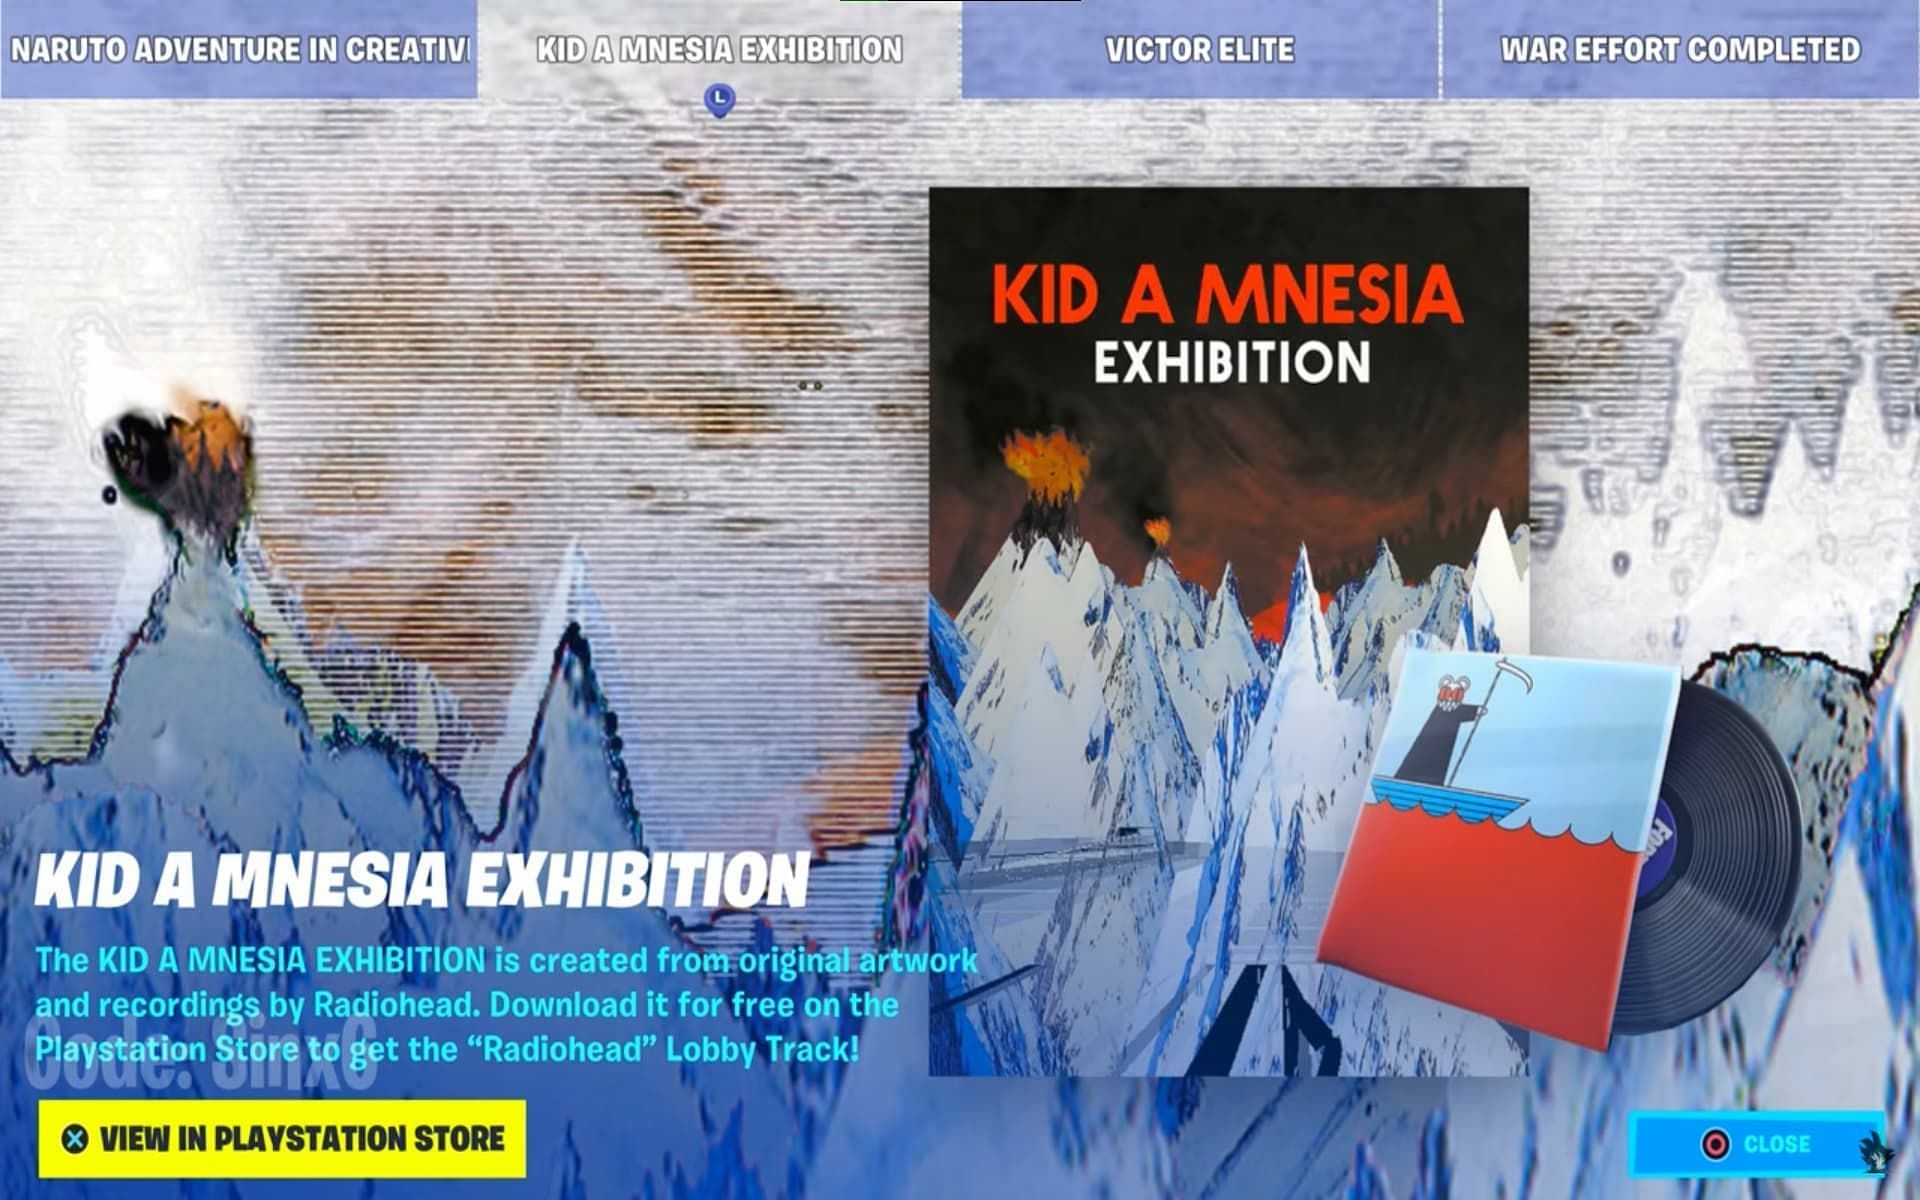 The Kid A Mnesia Exhibition page in Fortnite (Image via Epic Games)